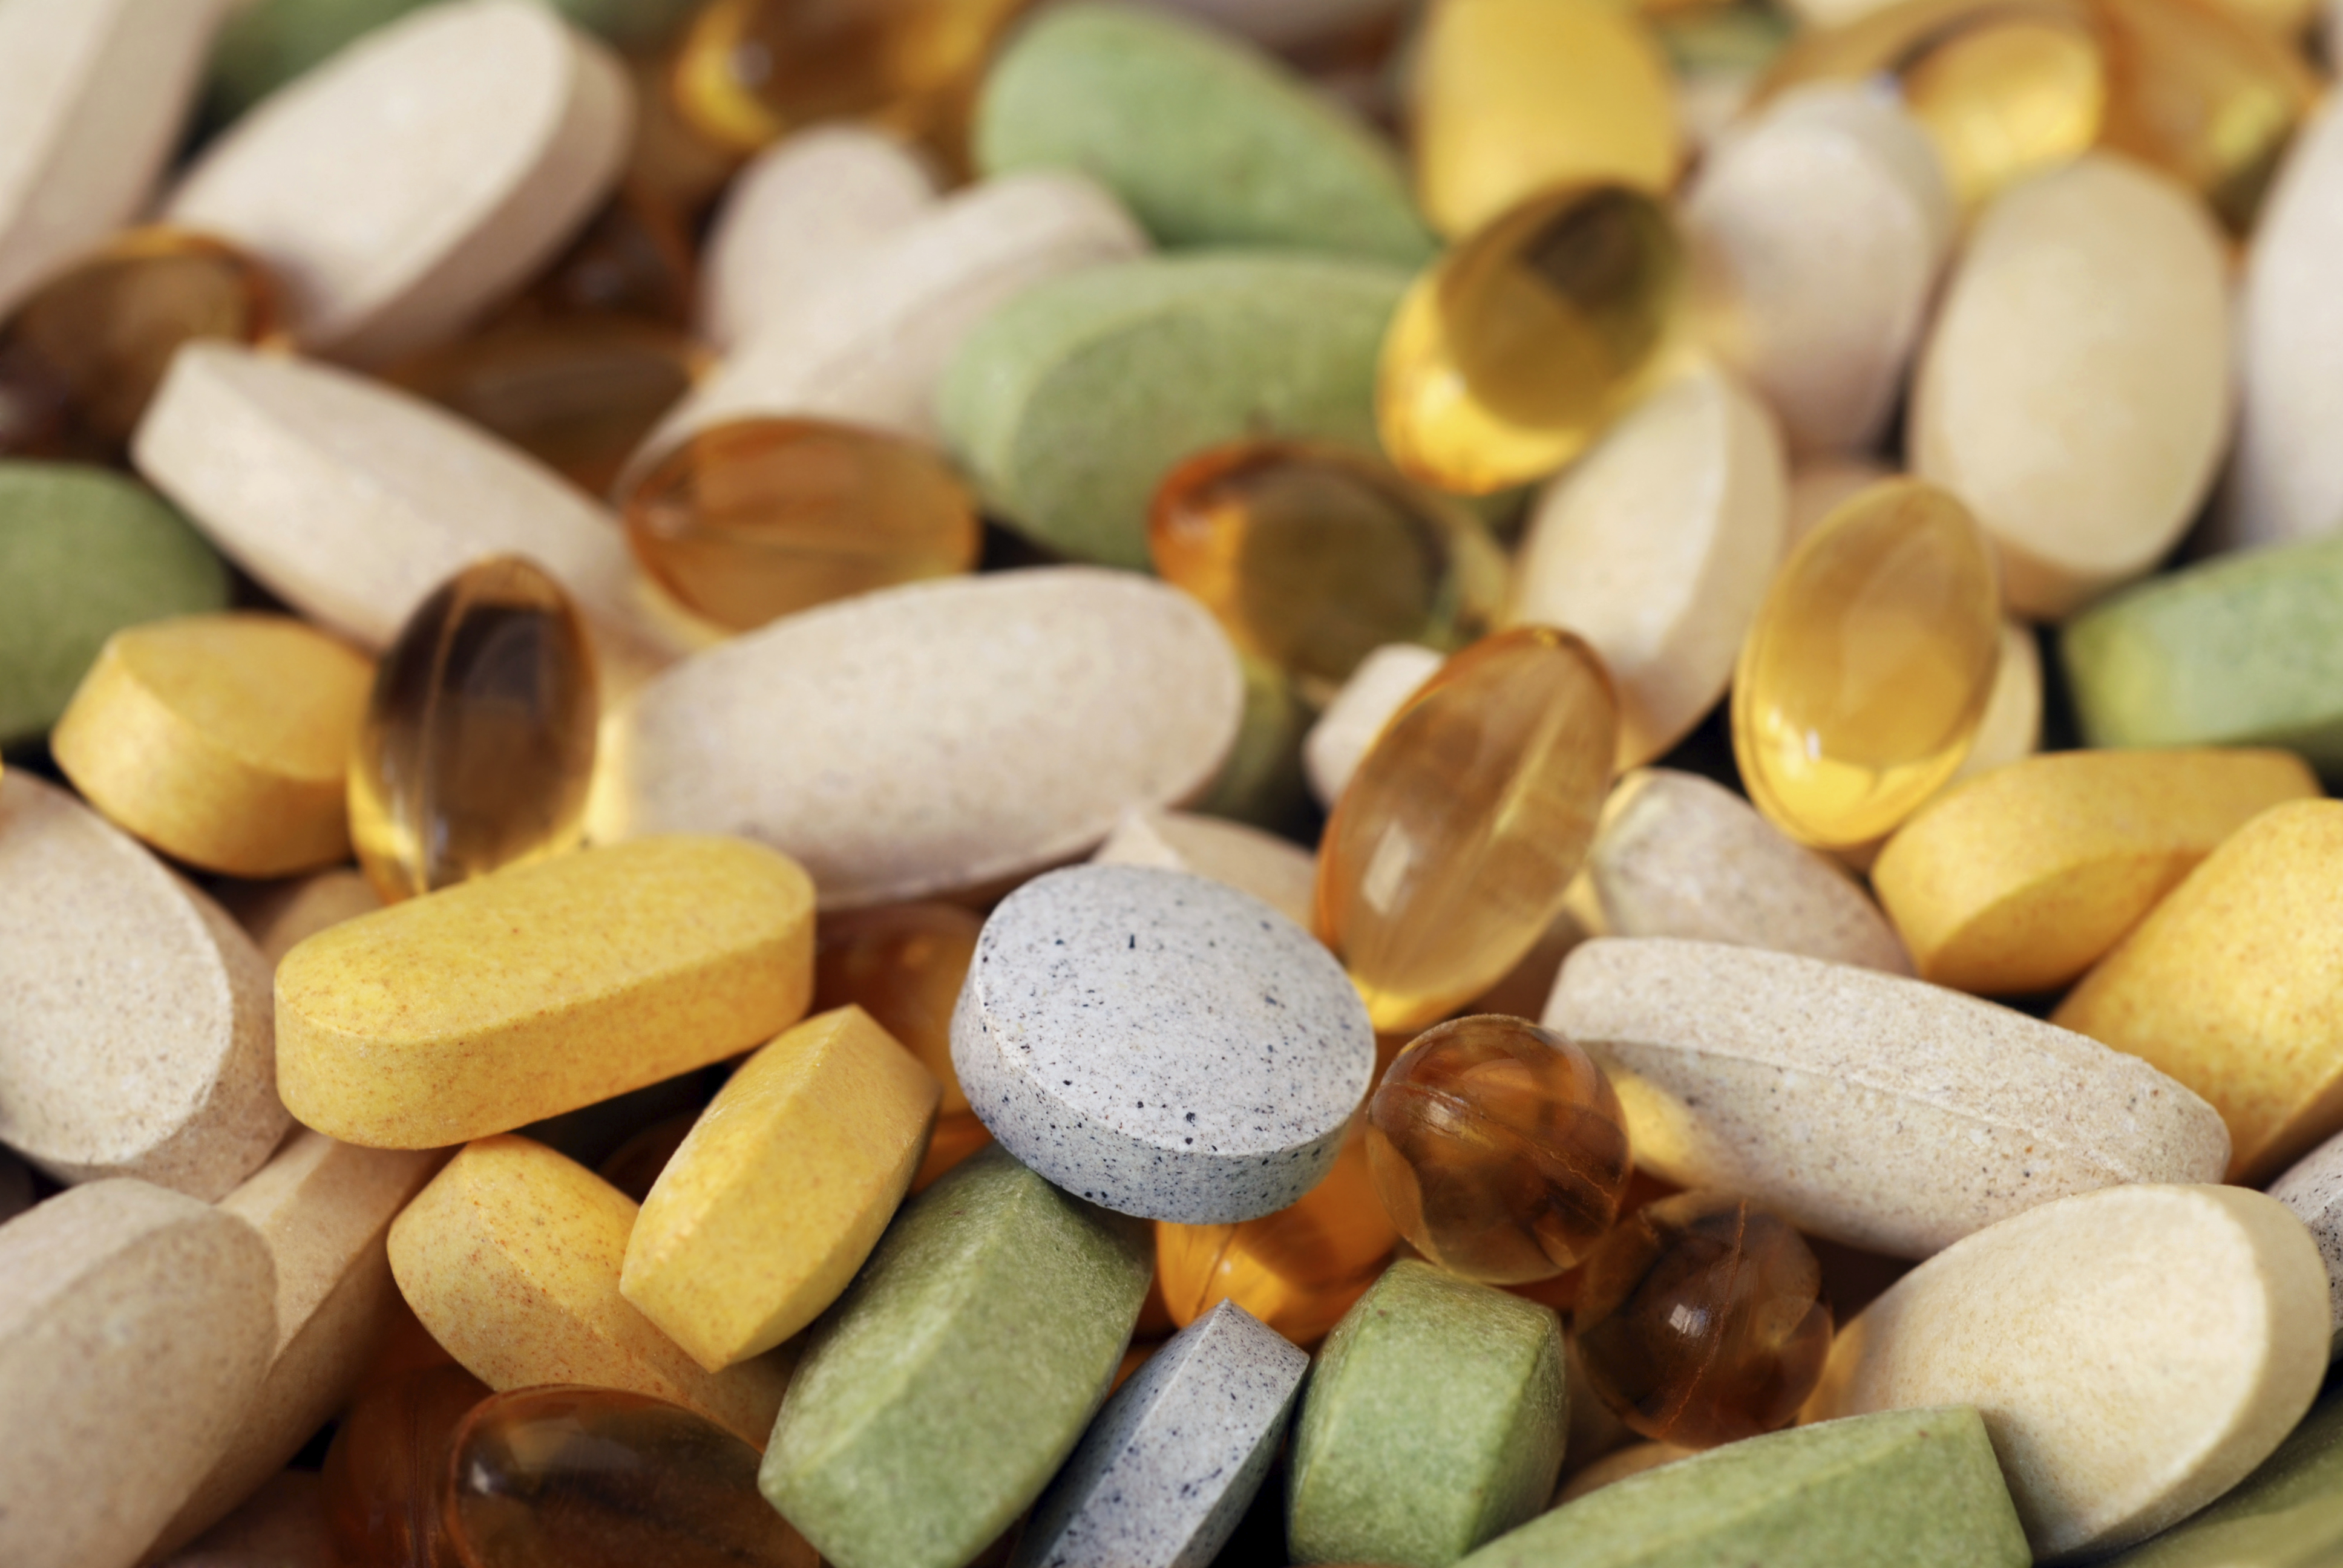 Dietary supplements linked to increased cancer risk - CBS News